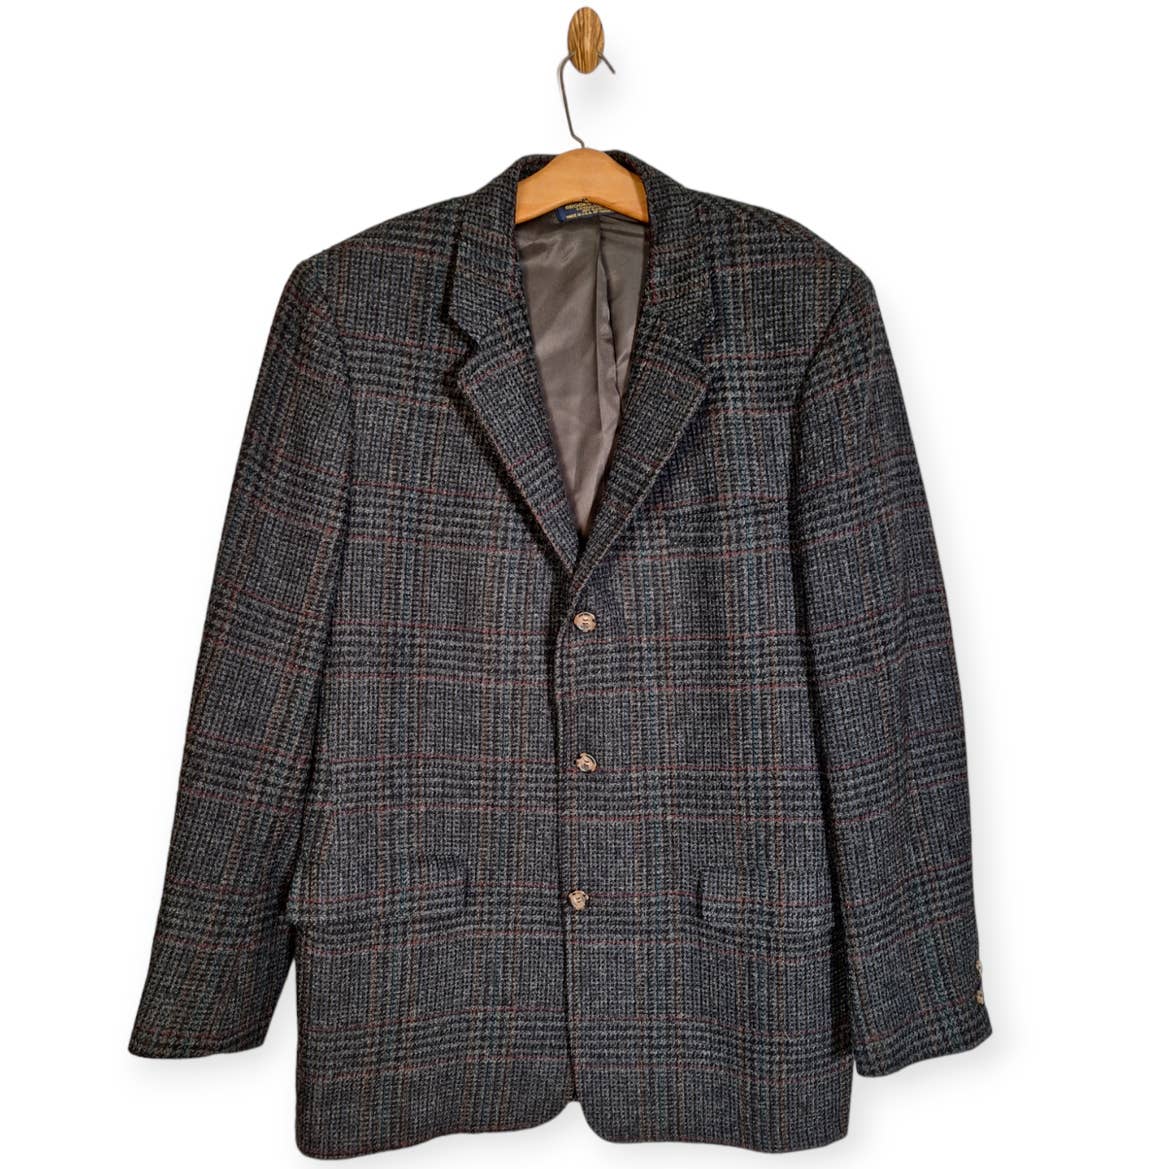 Vintage 80s/90s Brooks Brothers Wool 3 Button Sport Coat Rainbow Threaded Tweed Size 44-46L themallvintage The Mall Vintage